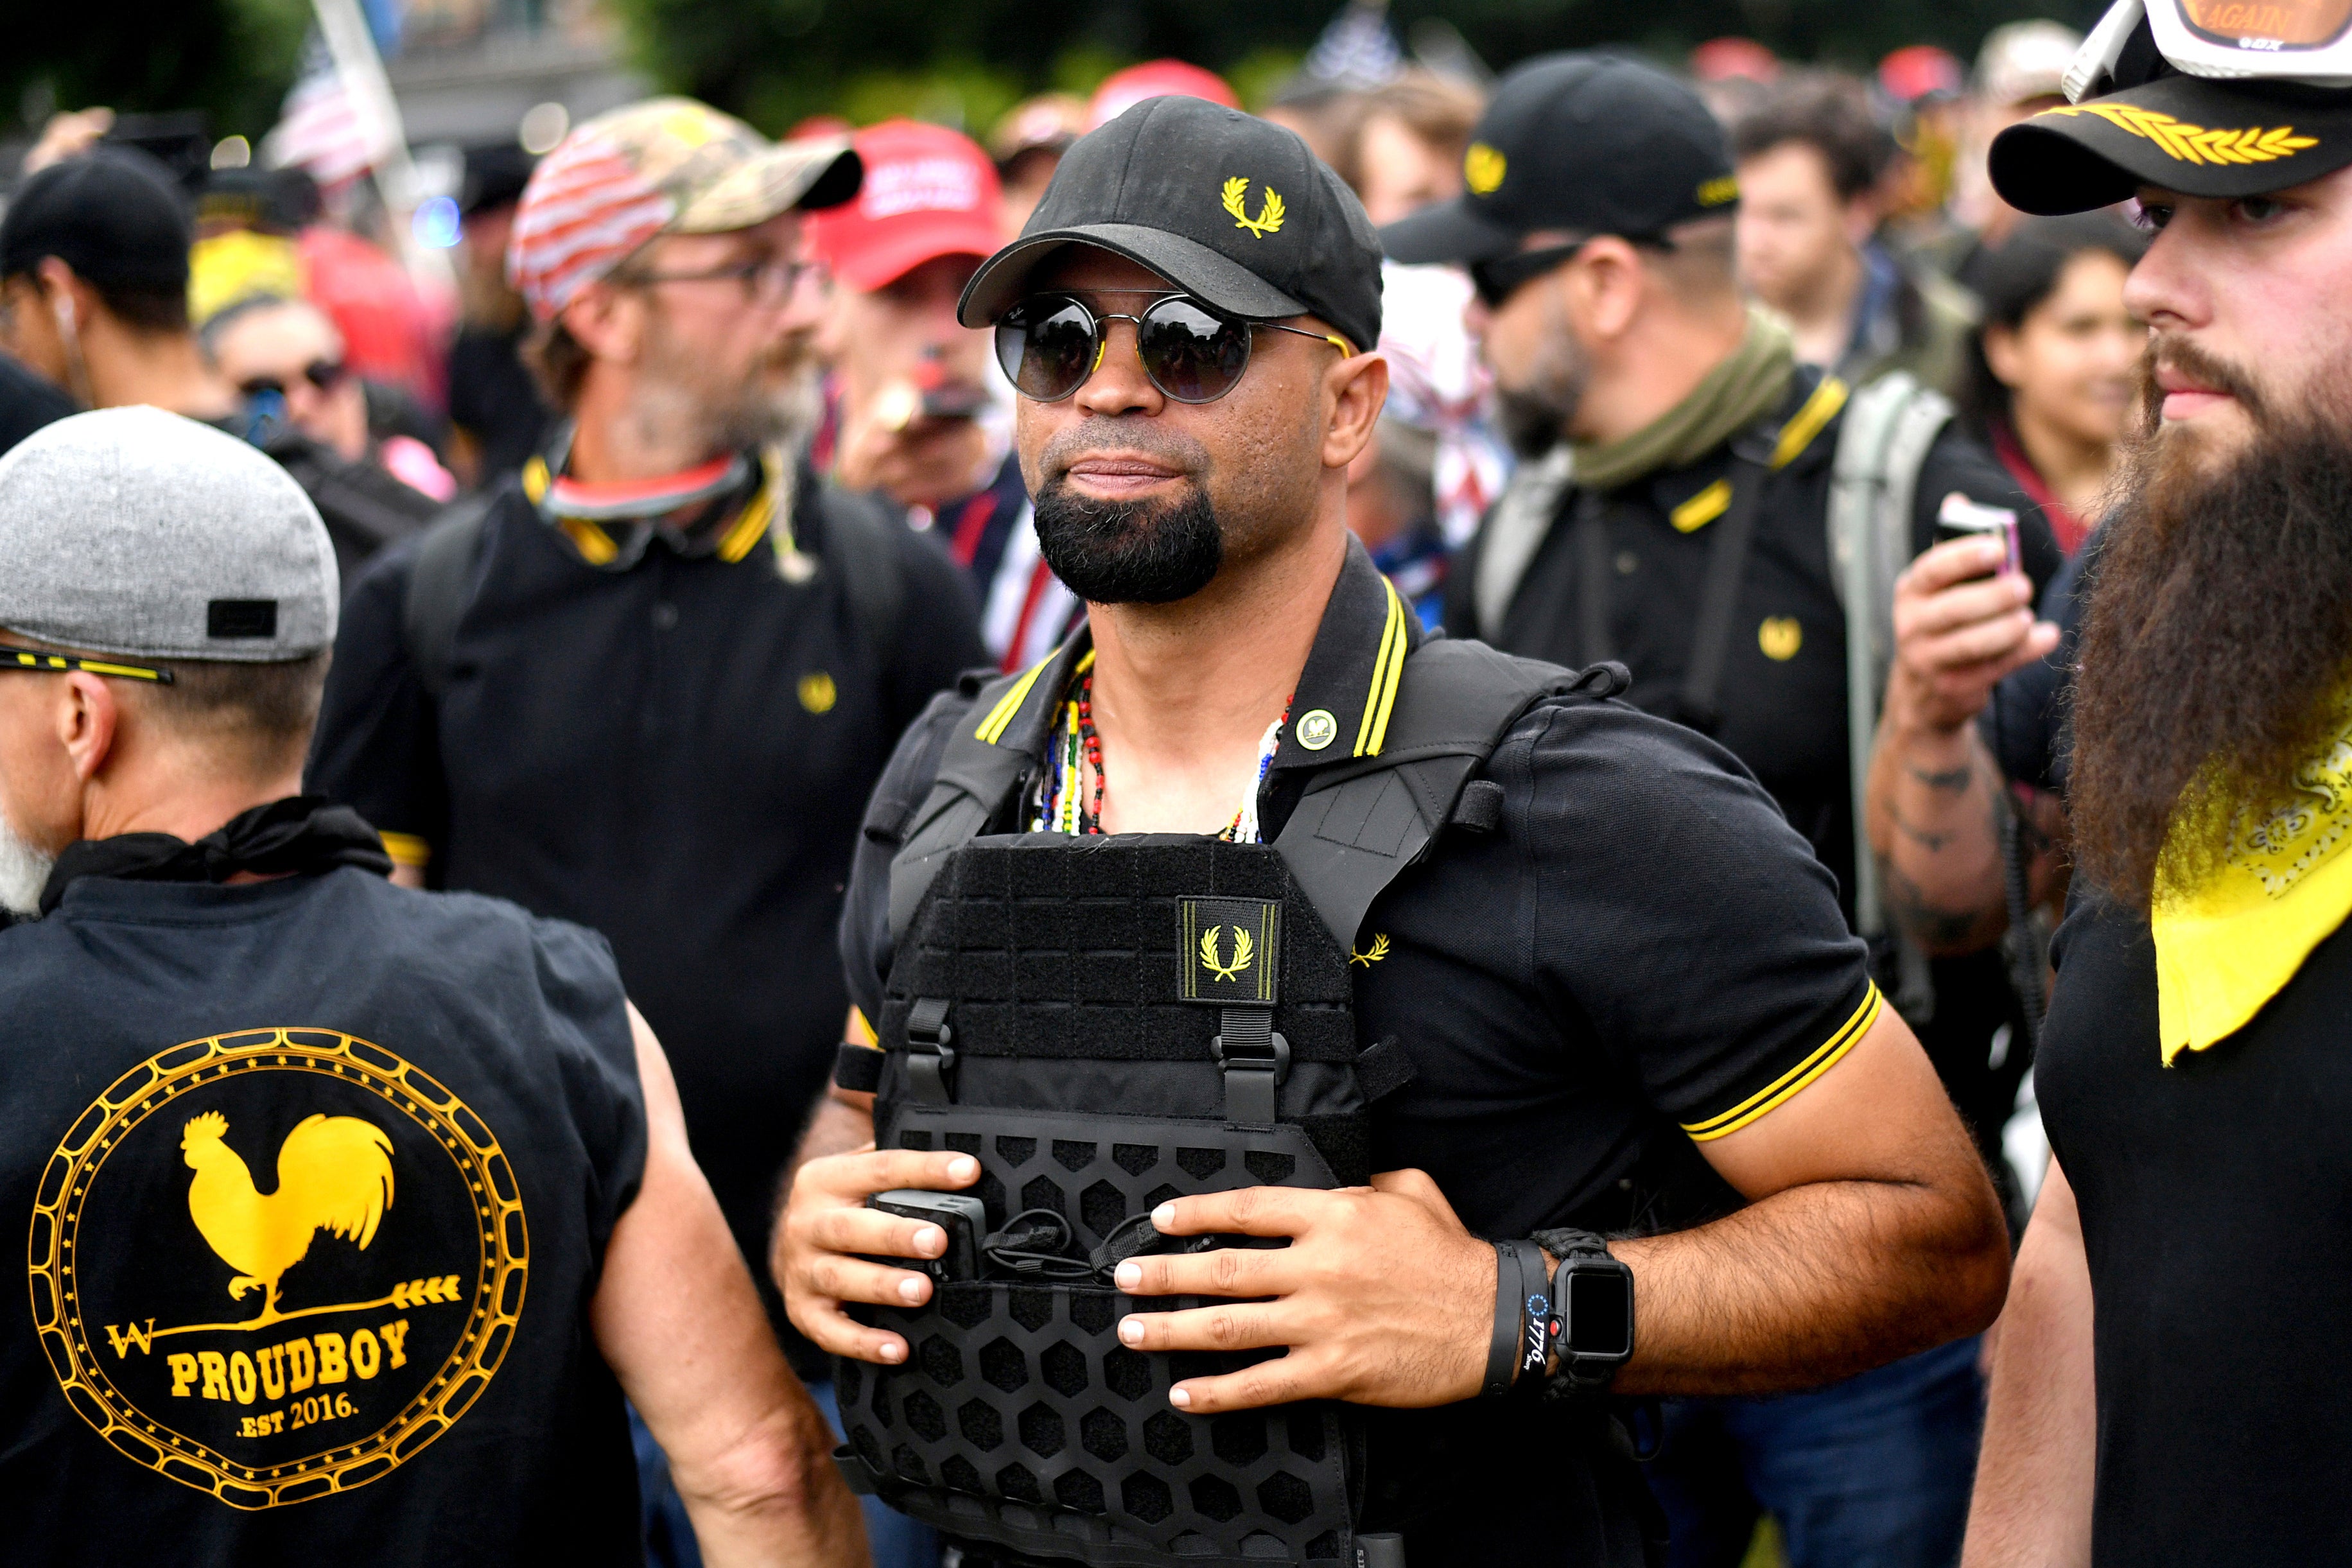 Former Proud Boys chairman Enrique Tarrio, pictured in 2019, is among five members of the gang charged with seditious conspiracy in connection with the attack on the US Capitol on 6 January, 2021